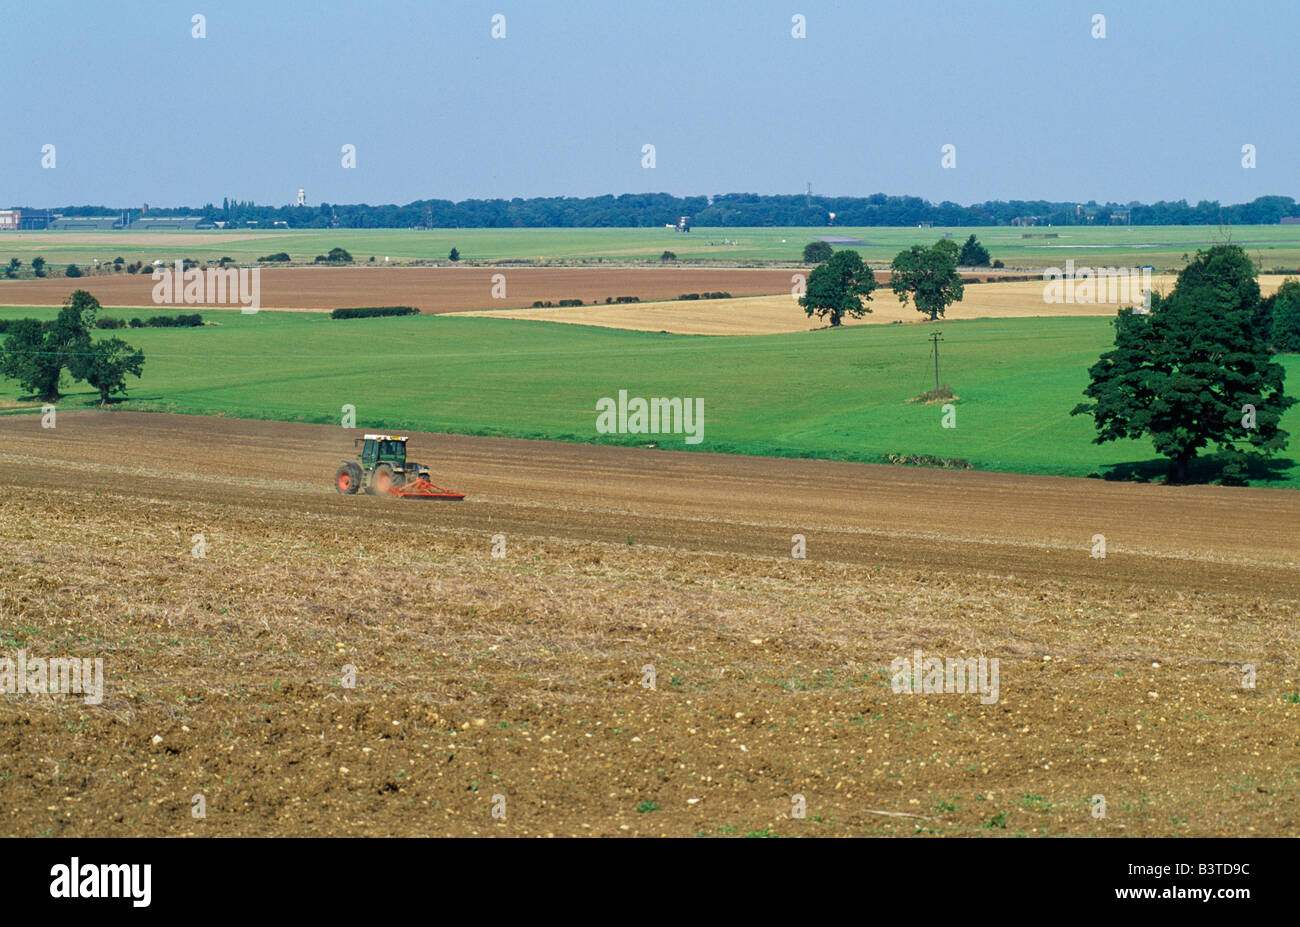 England, Lincolnshire, Cranwell. Tractor rolling a ploughed field with view over RAF Cranwell. North Kesteven. Stock Photo